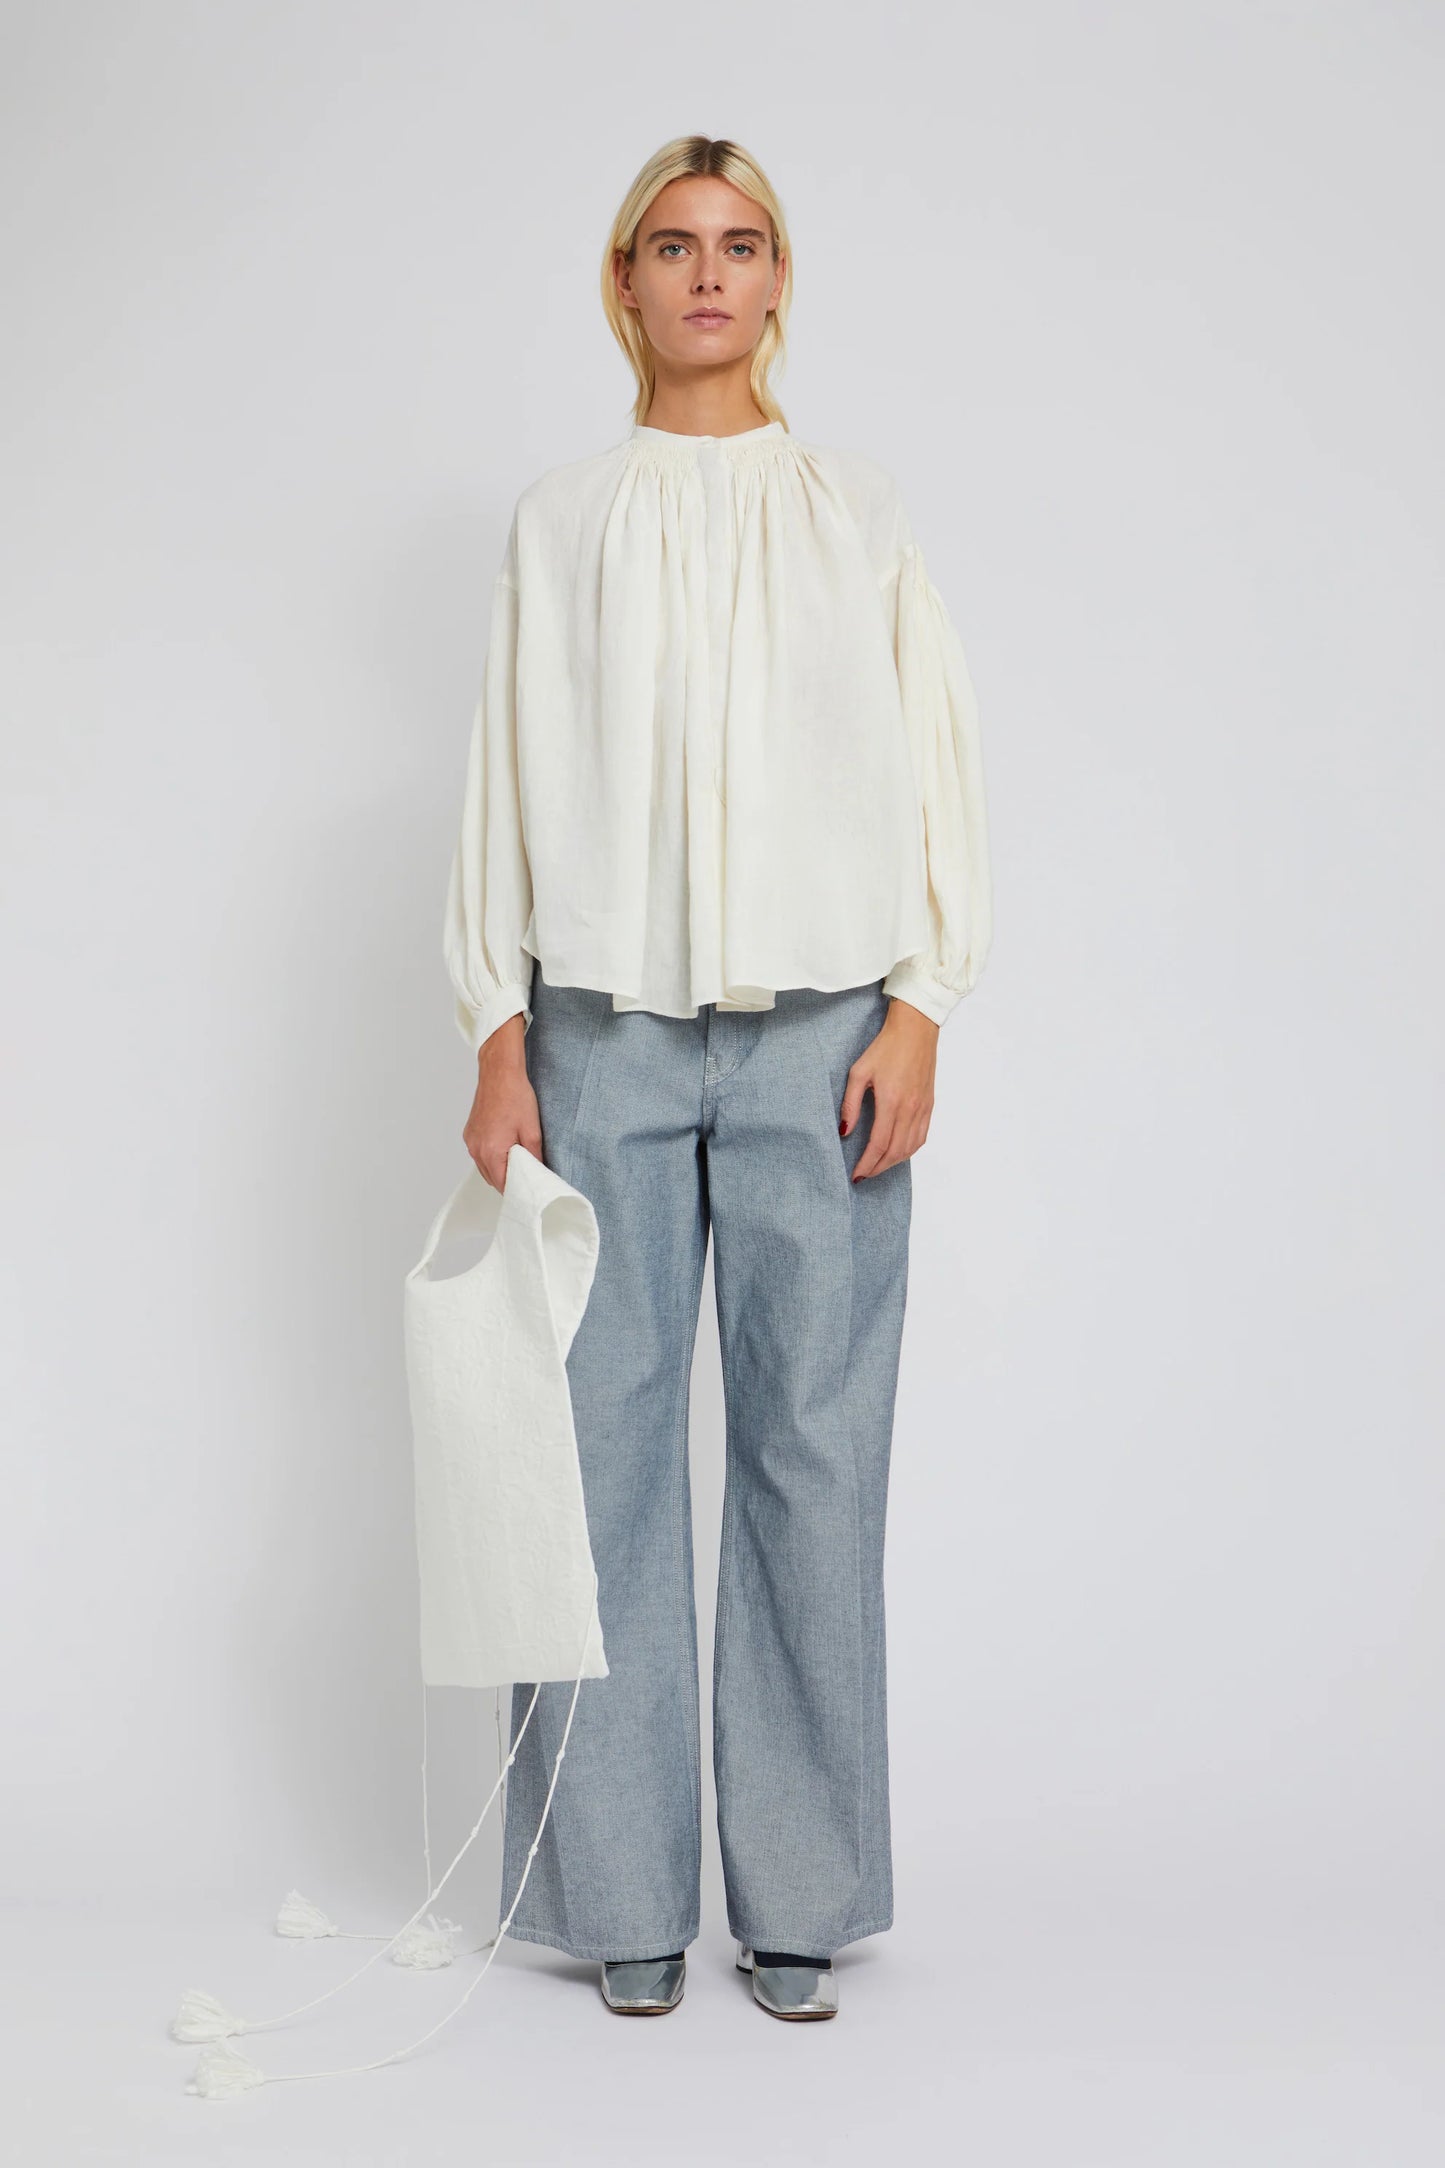 Laurence Bras Clare white linen blouse